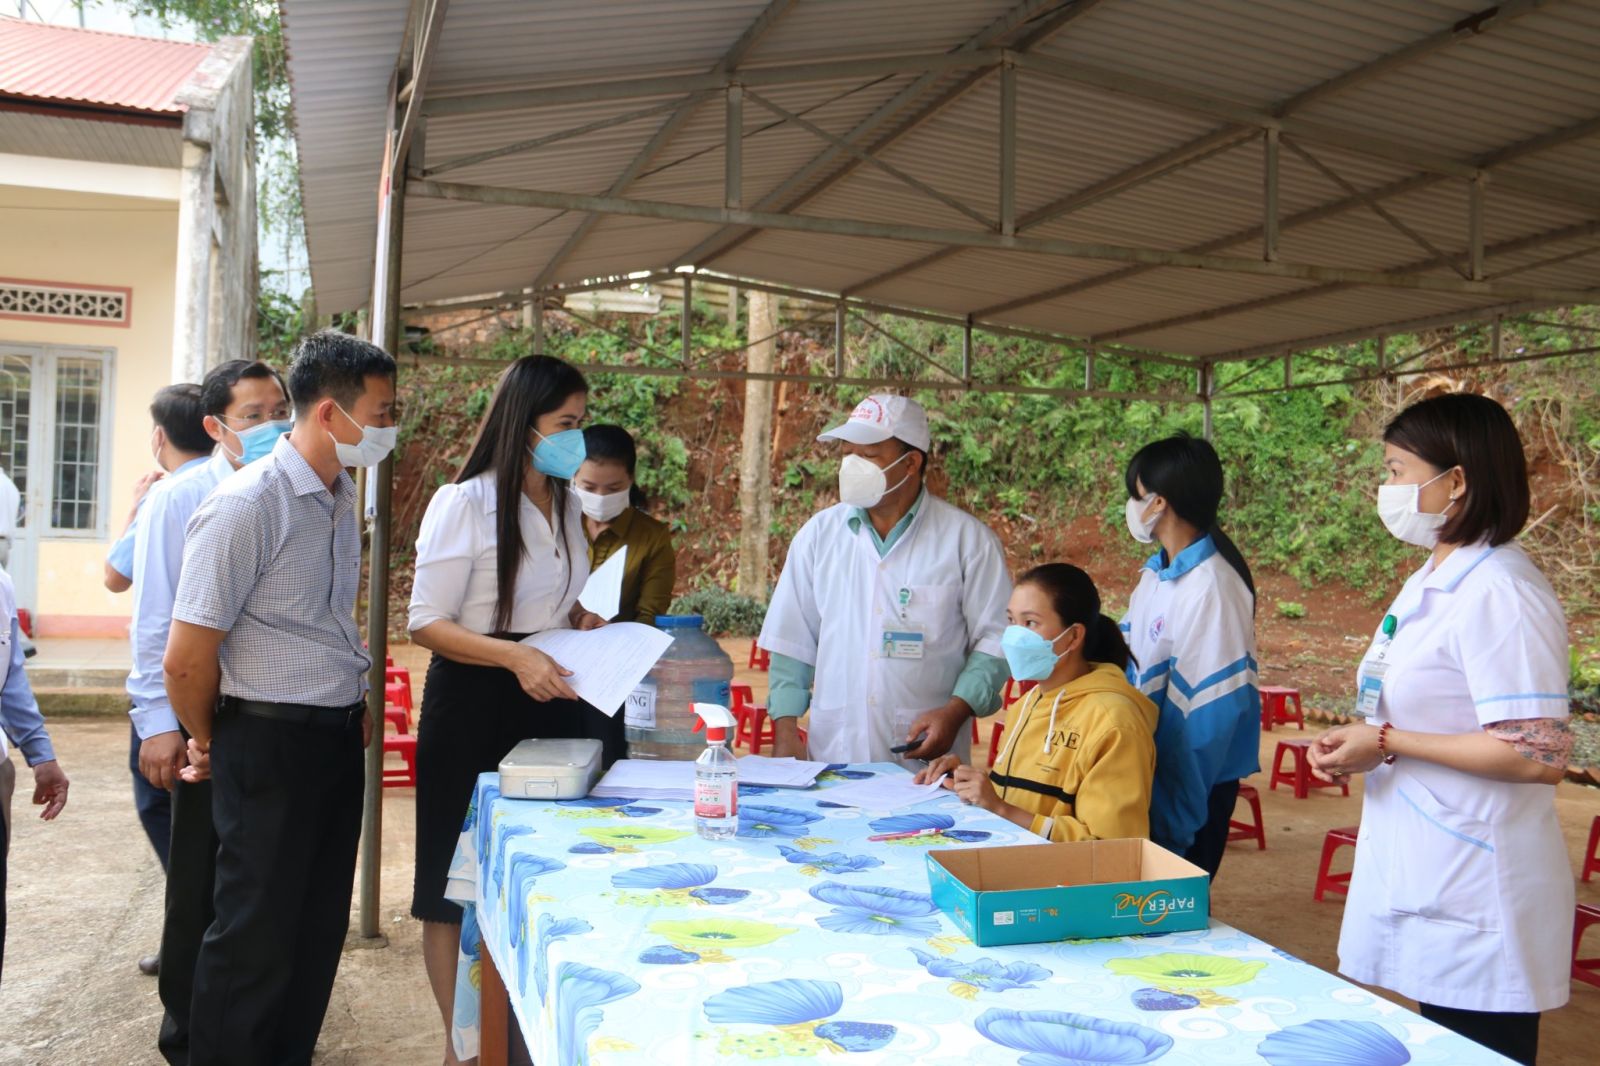 The Ministry of Health's request regarding proactive implementation of disease prevention and control activities in Vietnam